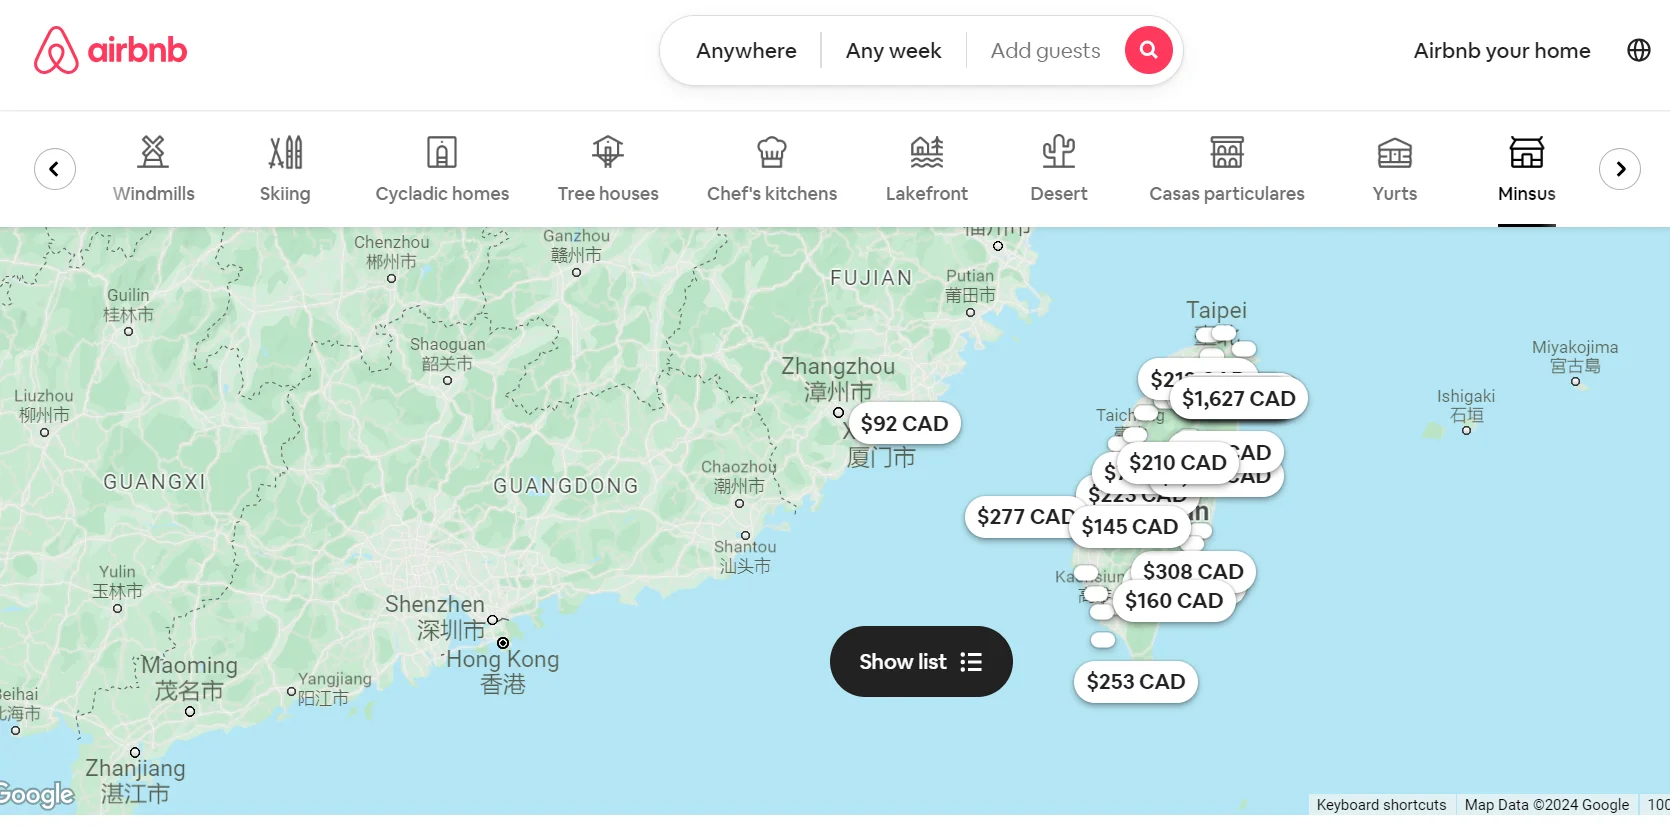 An visual map on how to add location to airbnb